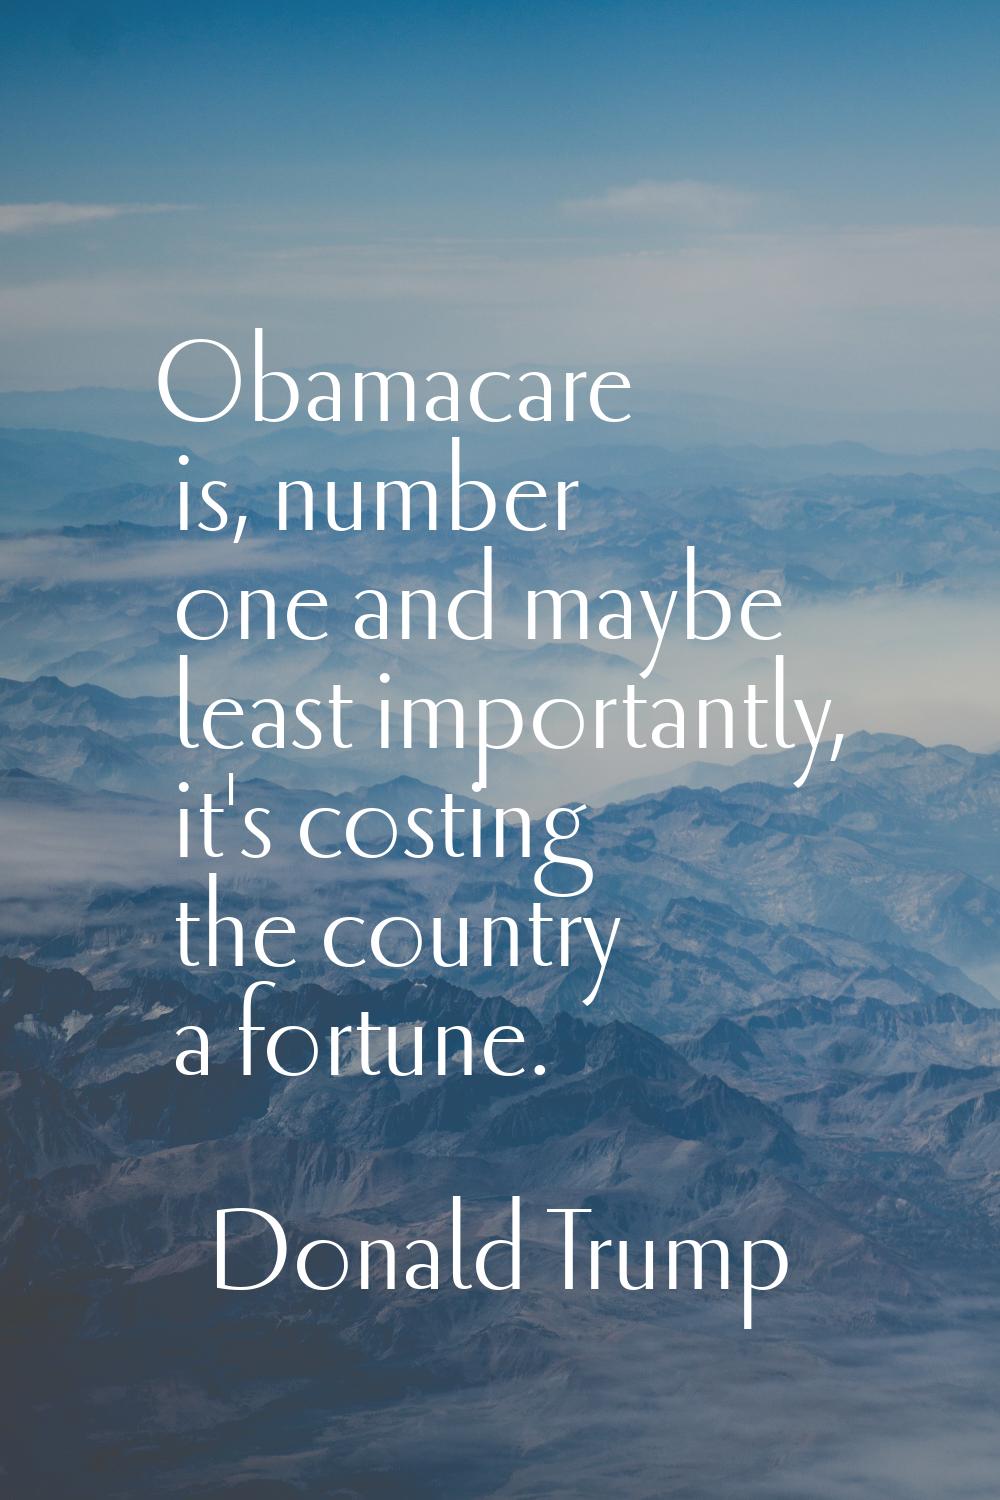 Obamacare is, number one and maybe least importantly, it's costing the country a fortune.